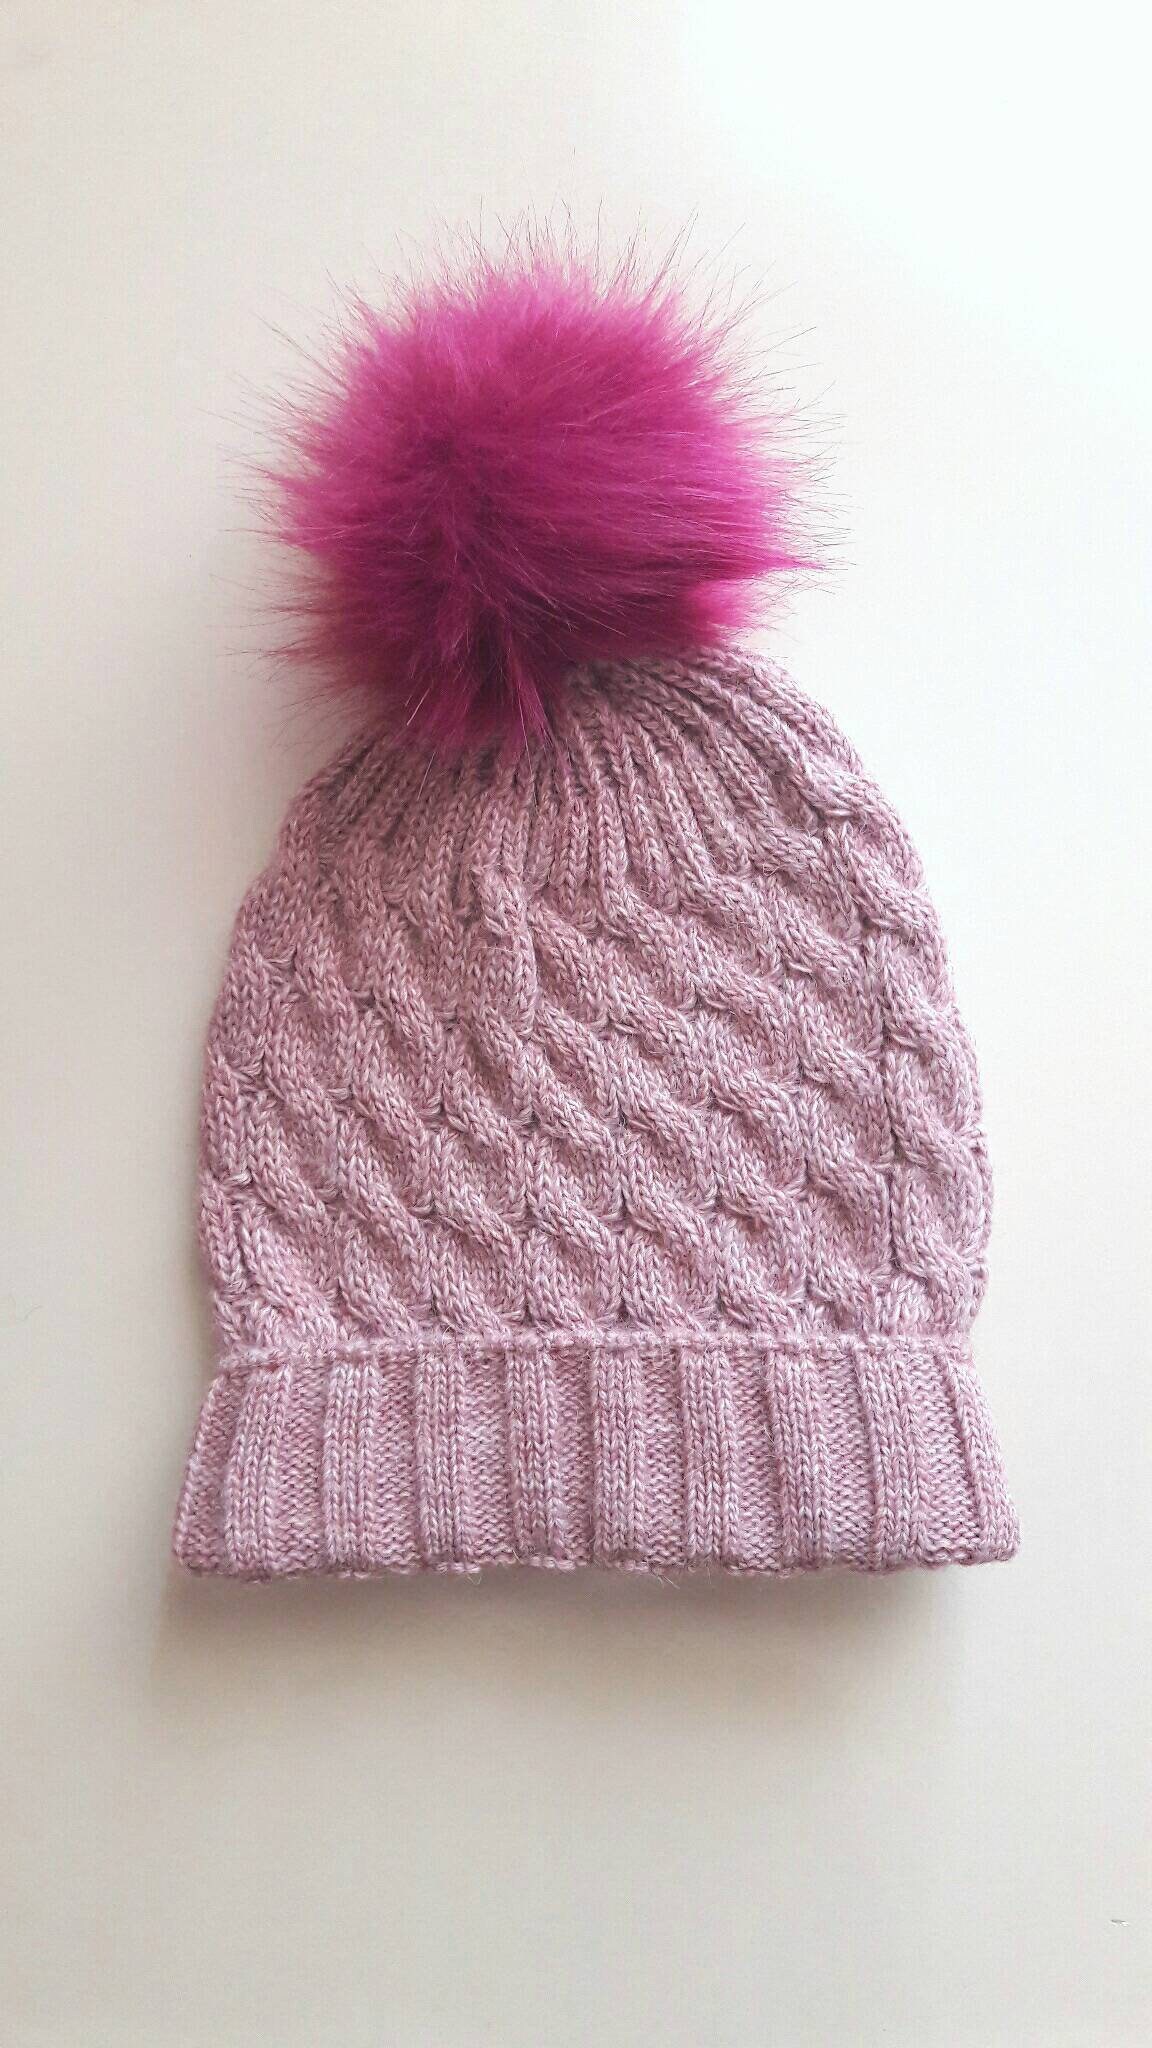 Pastel Pink Cable Knit Beanie with Faux Fur Pom Pom Slouchy | Etsy